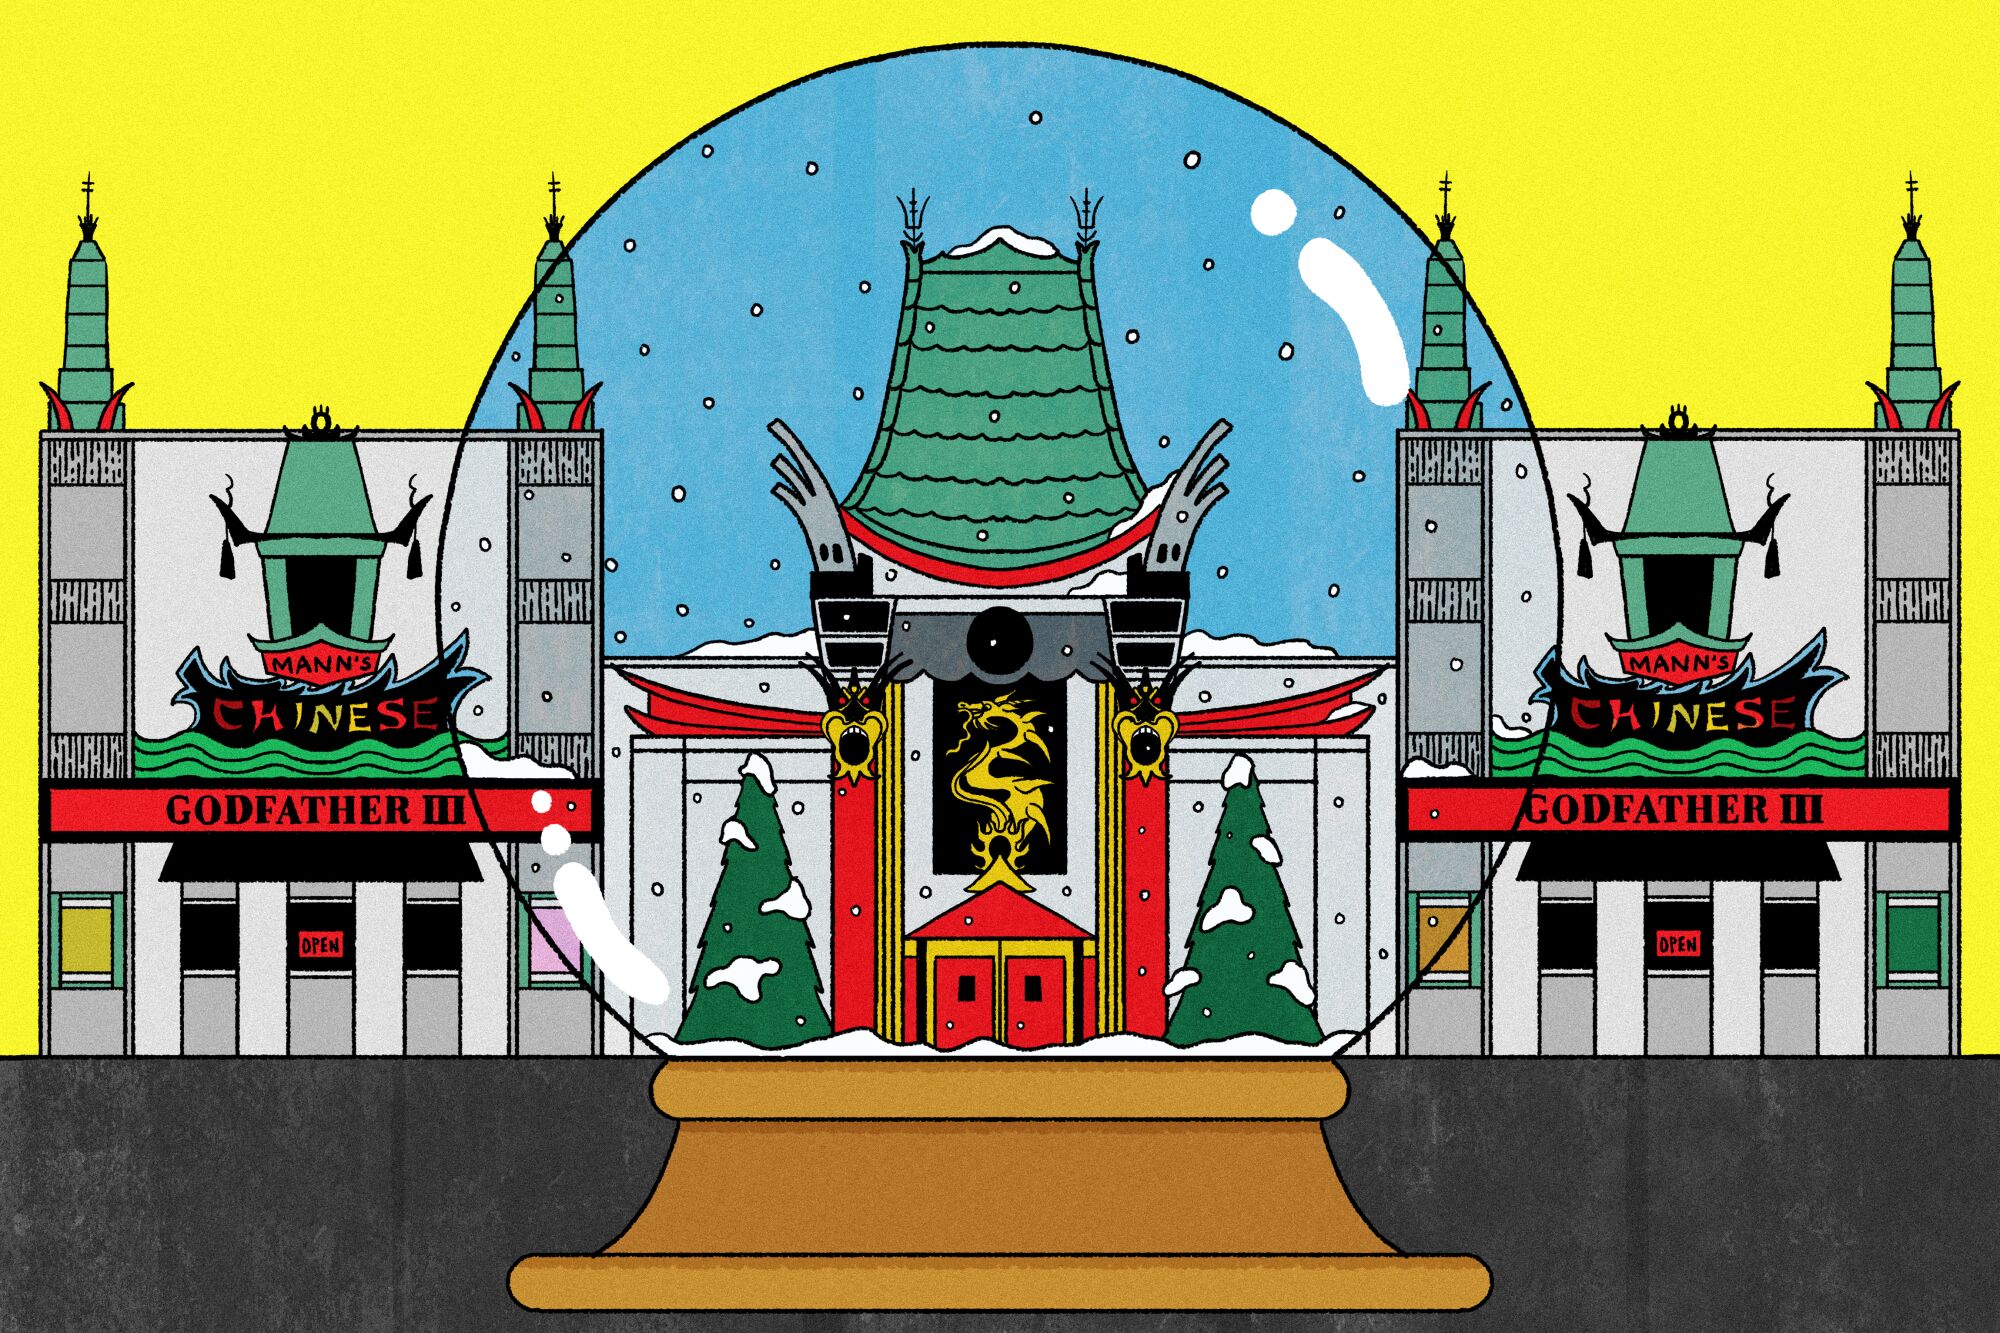 Illustration of Mann's Chinese Theater, with the central section depicted inside a snow globe.